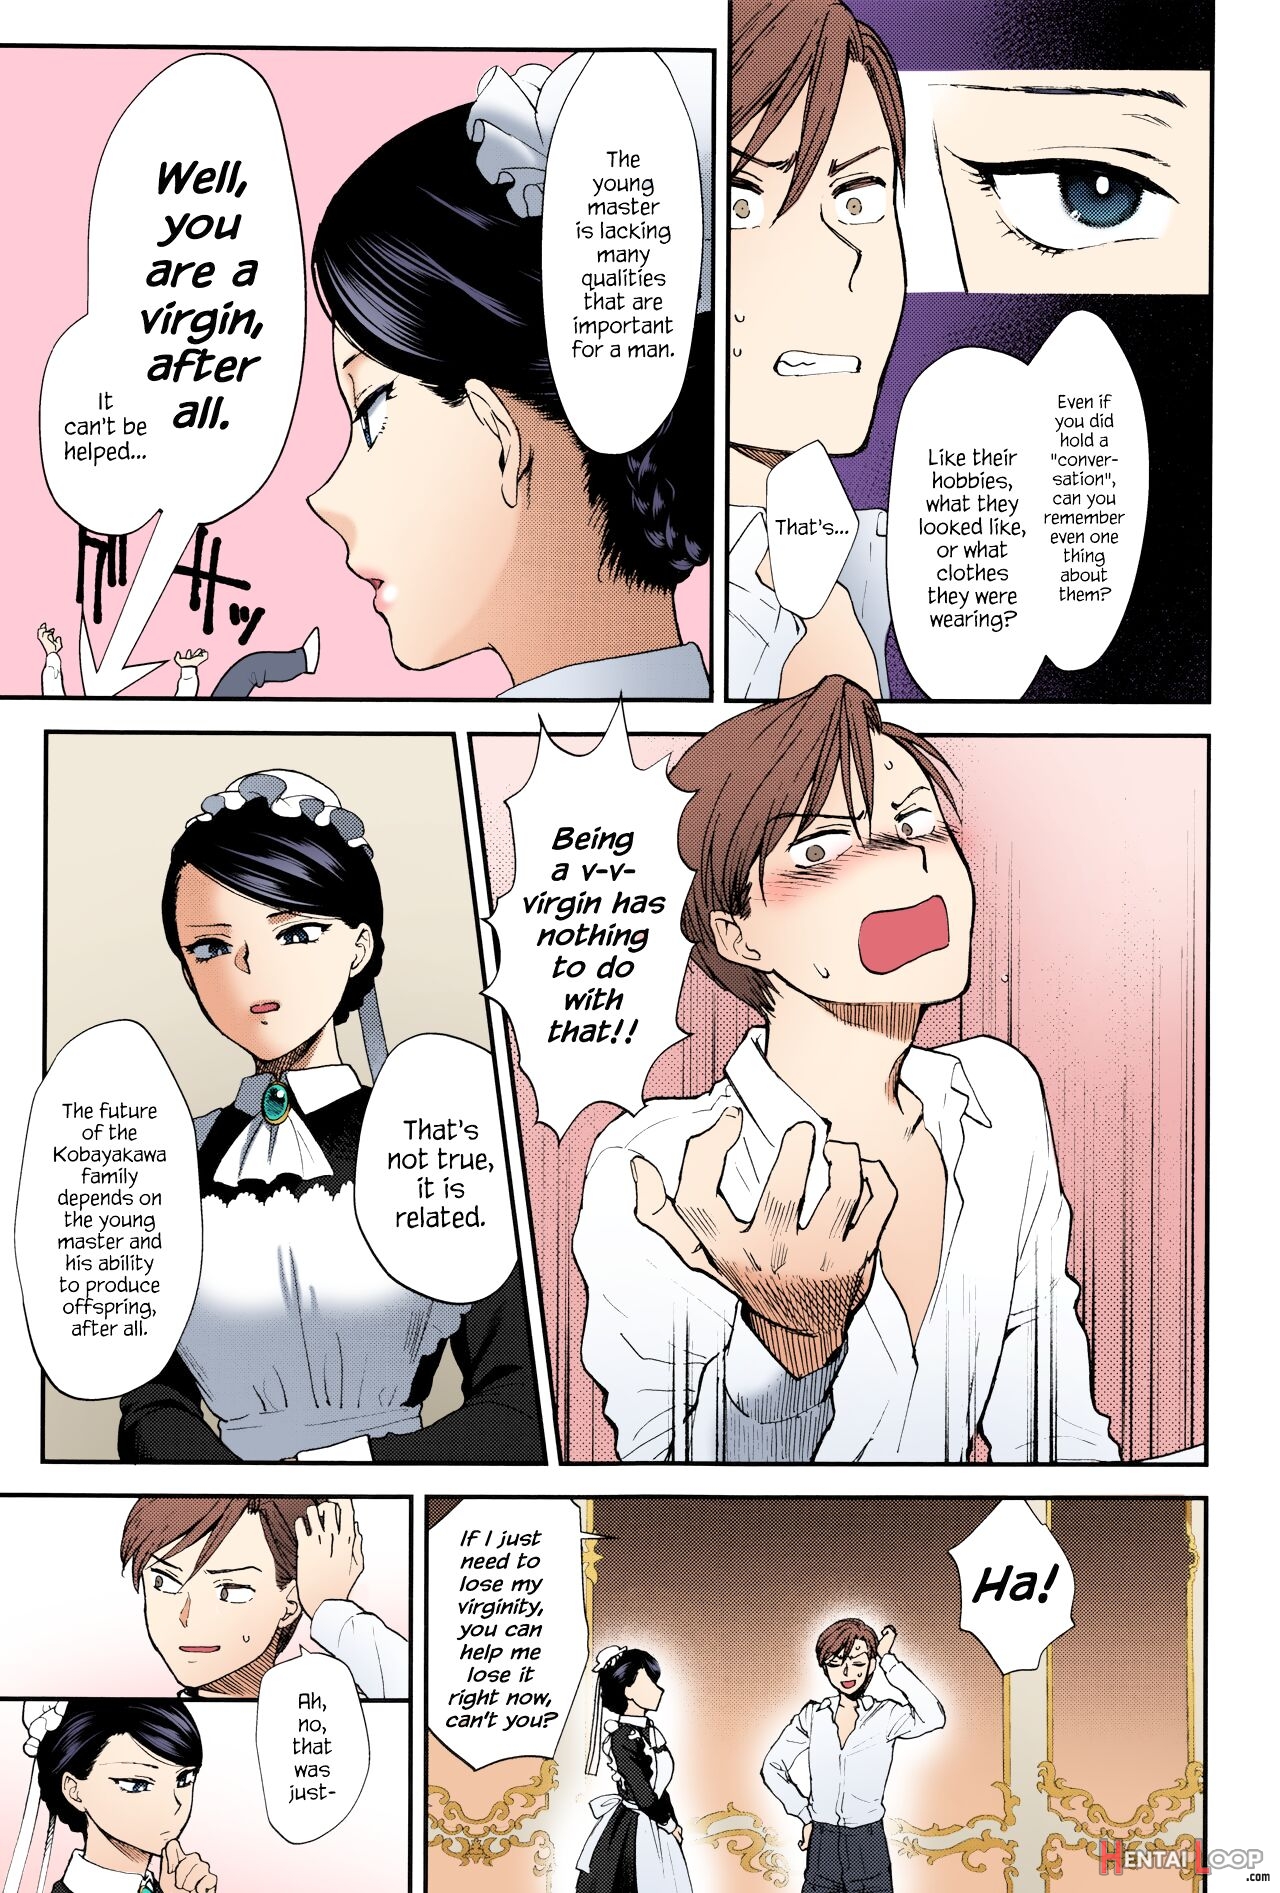 Kyoudou Well Maid - The Well “maid” Instructor page 5